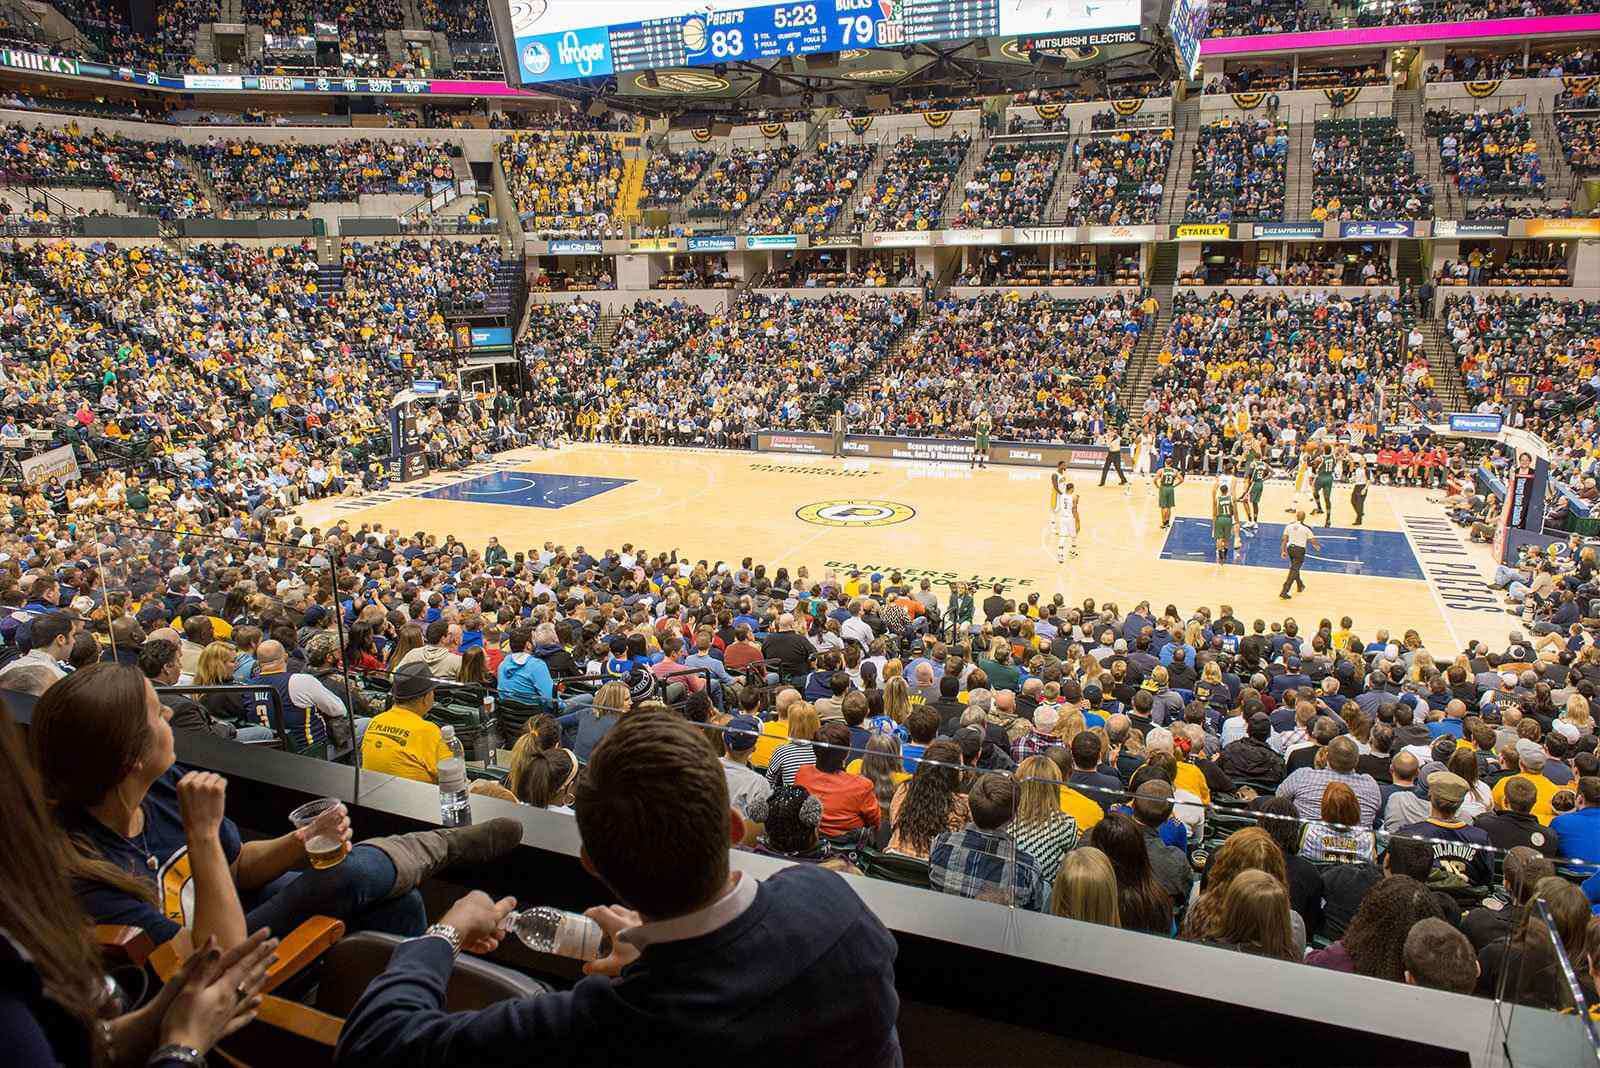 Bankers Life Fieldhouse: fans rank BLF among top arenas in the NBA